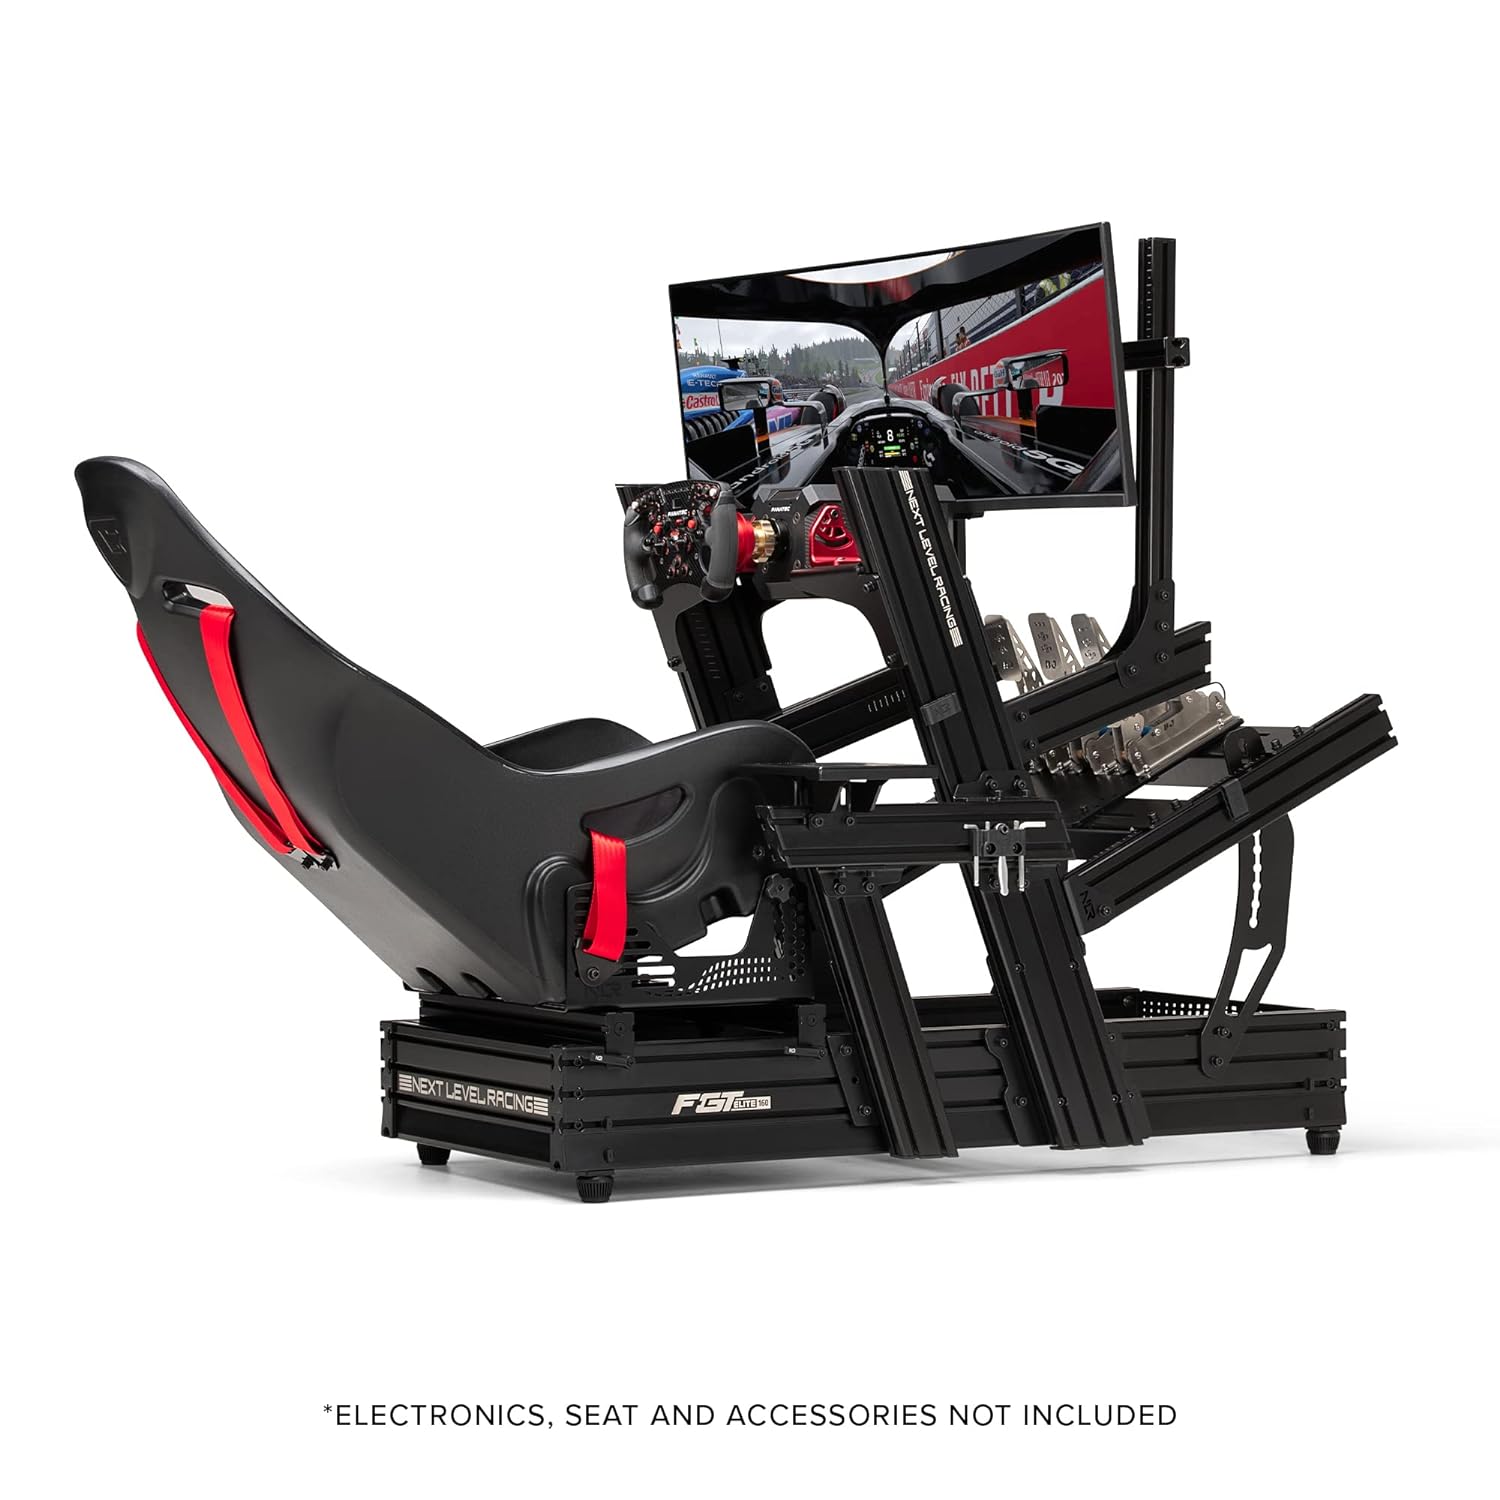 Next Level Racing F-GT Elite 160 Side & Front Plate Edition - maplin.co.uk